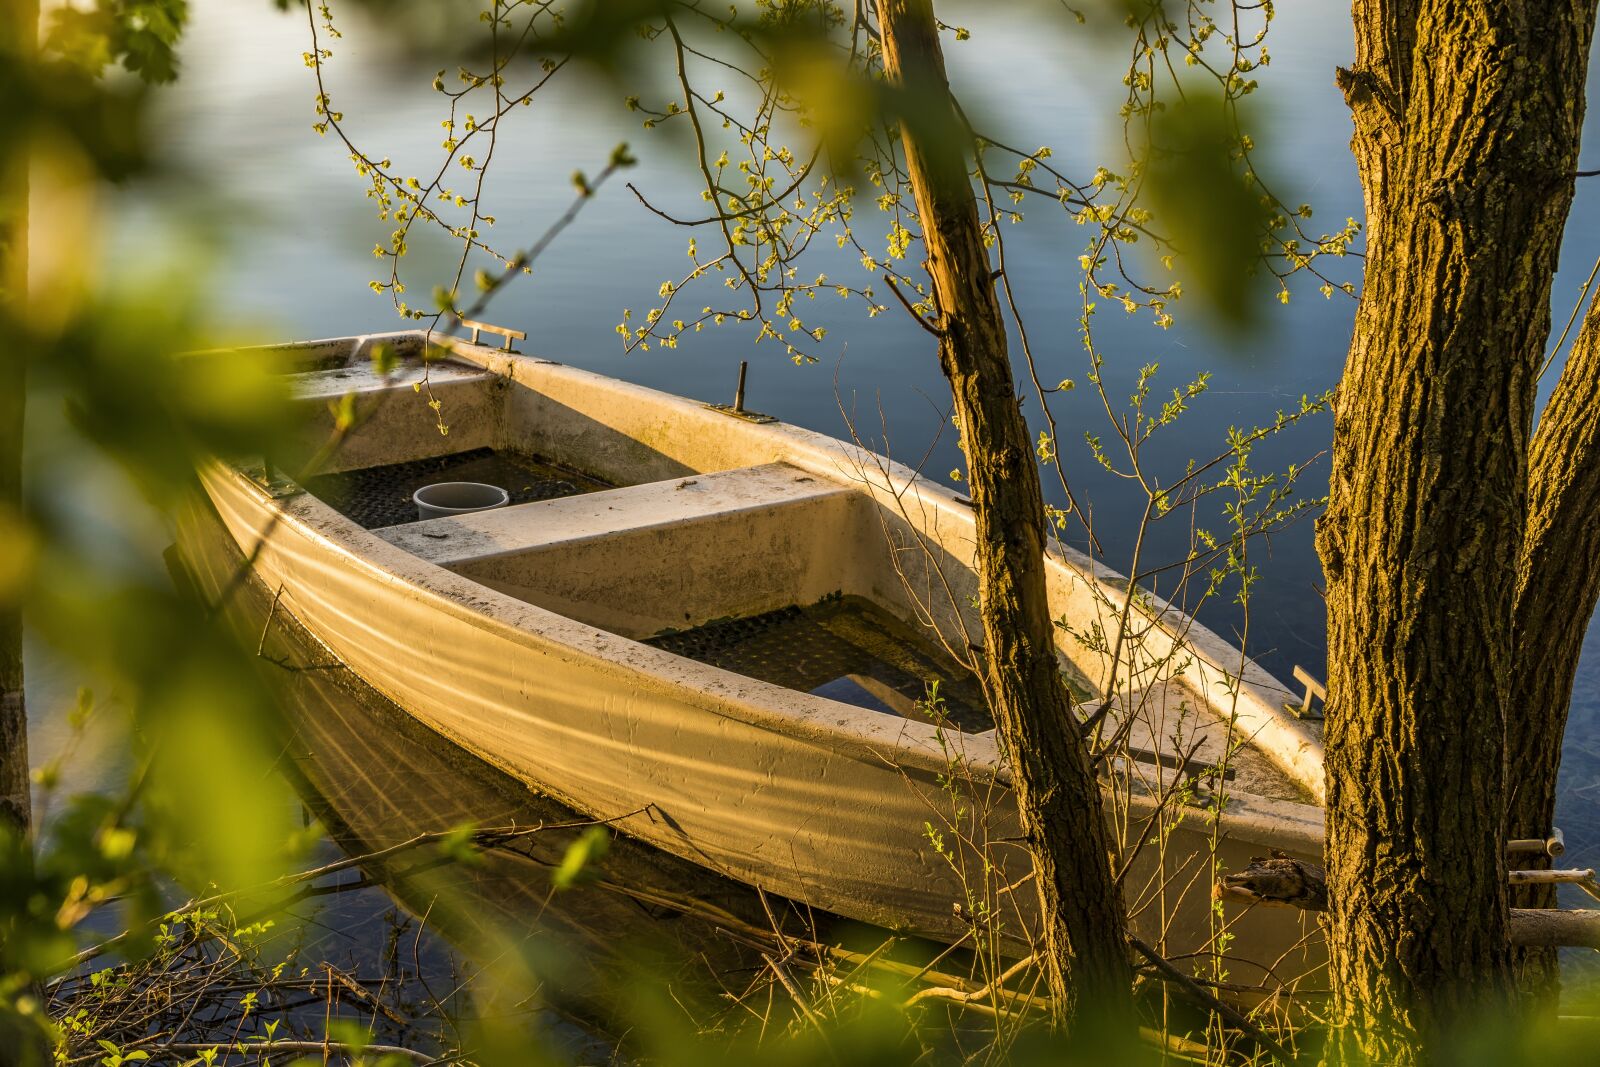 Sony a6300 sample photo. Boat, spring, water photography